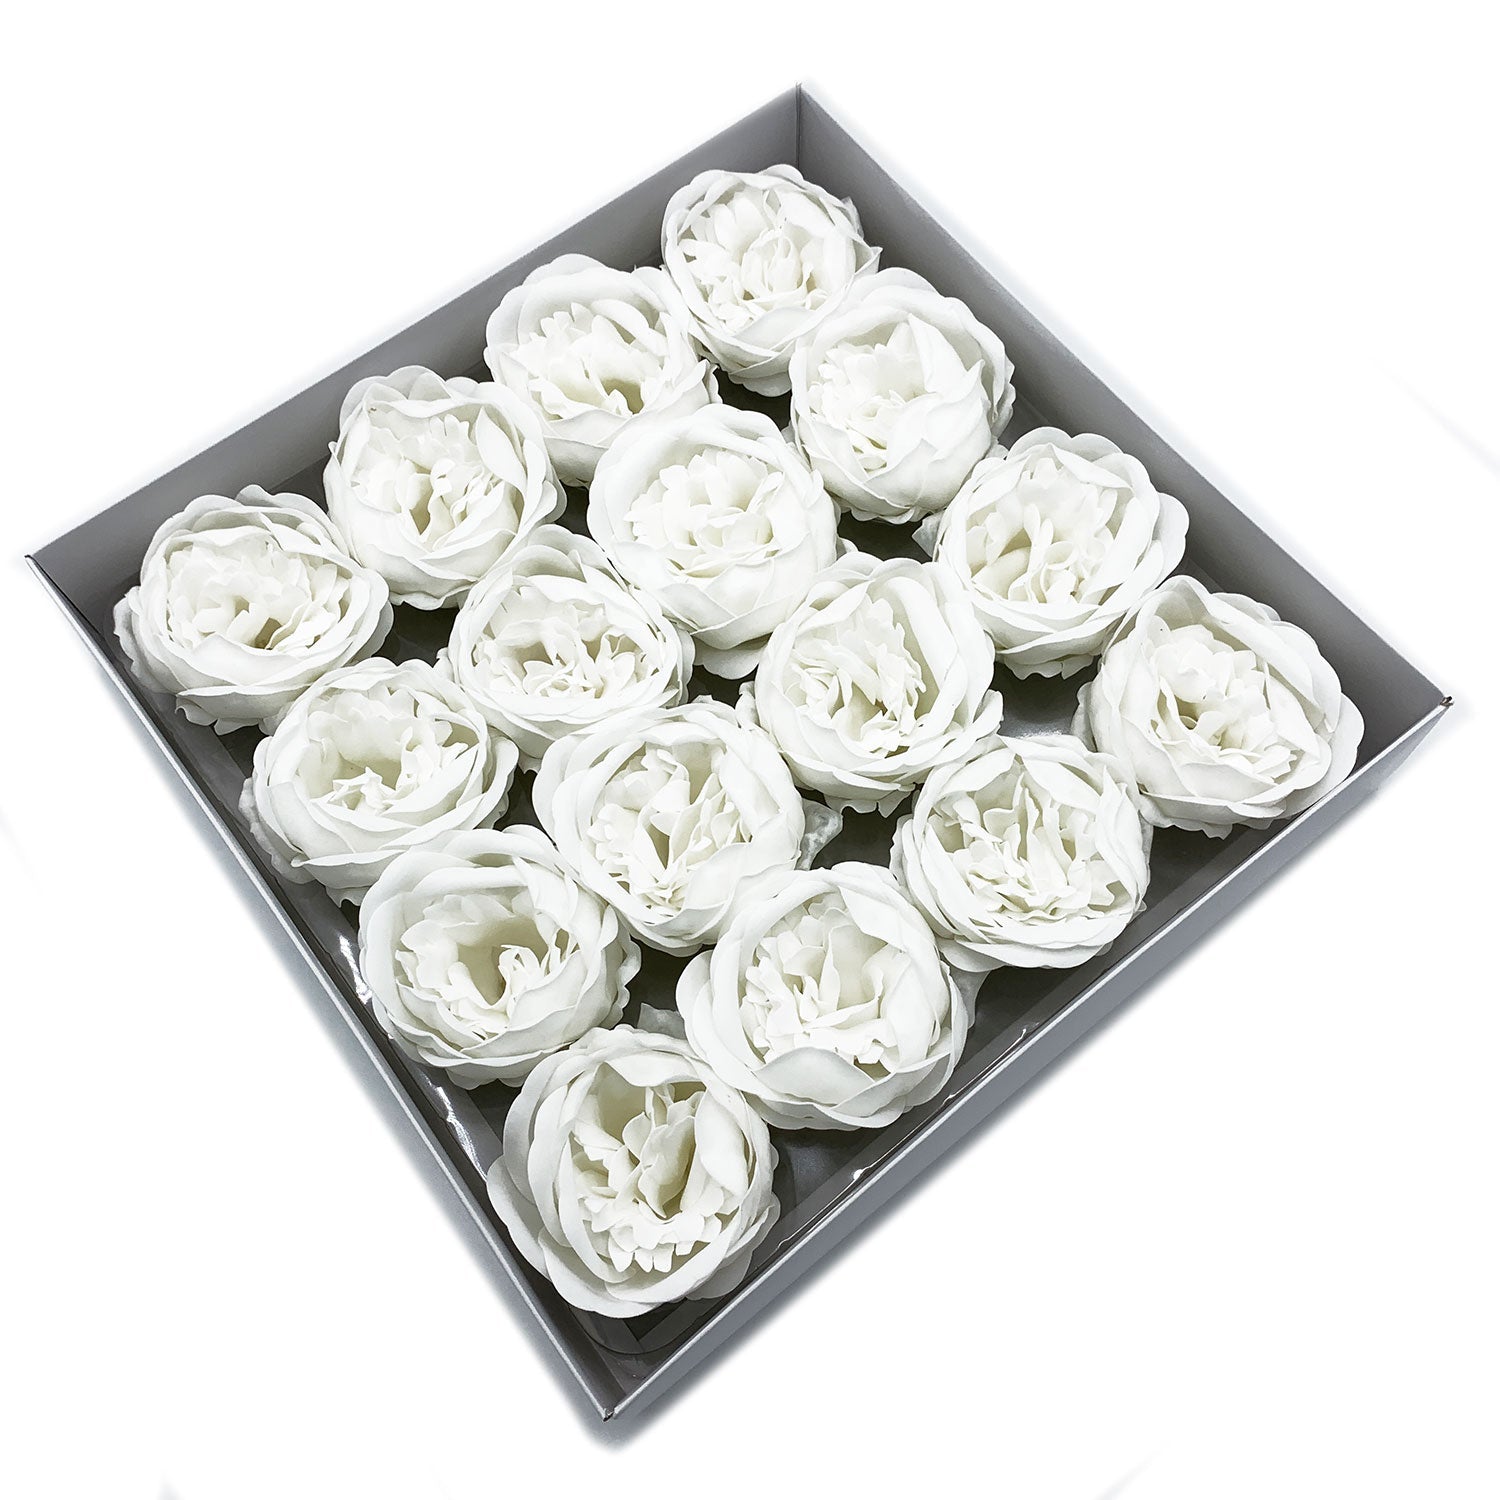 Craft Soap Flower - Ext Large Peony - White - £38.0 - 